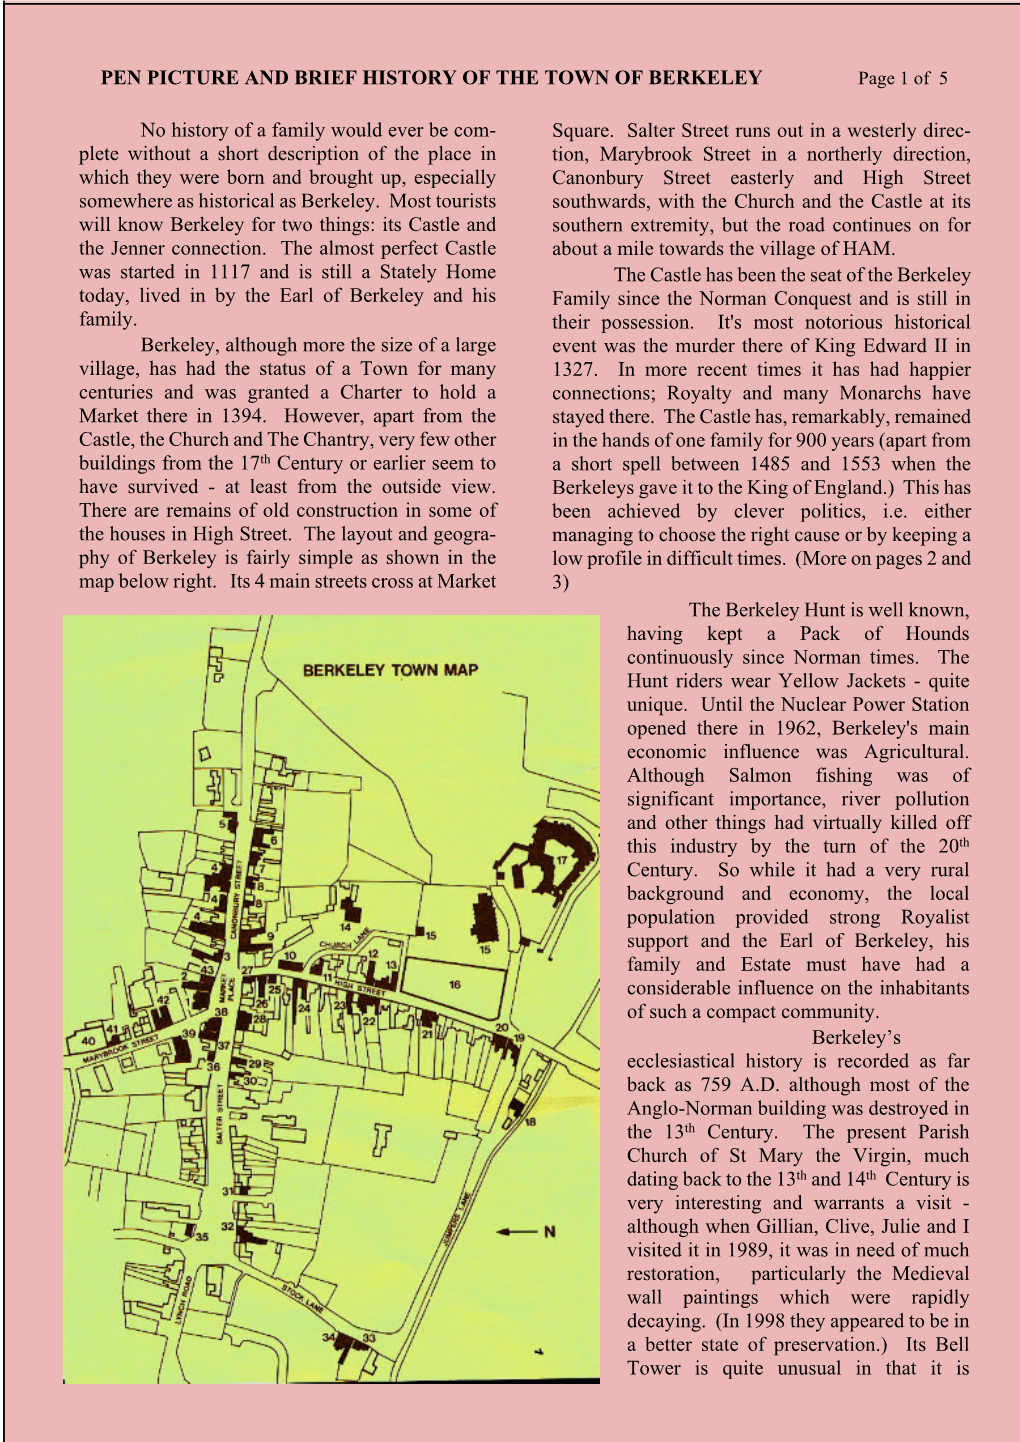 PEN PICTURE and BRIEF HISTORY of the TOWN of BERKELEY Page 1 of 5